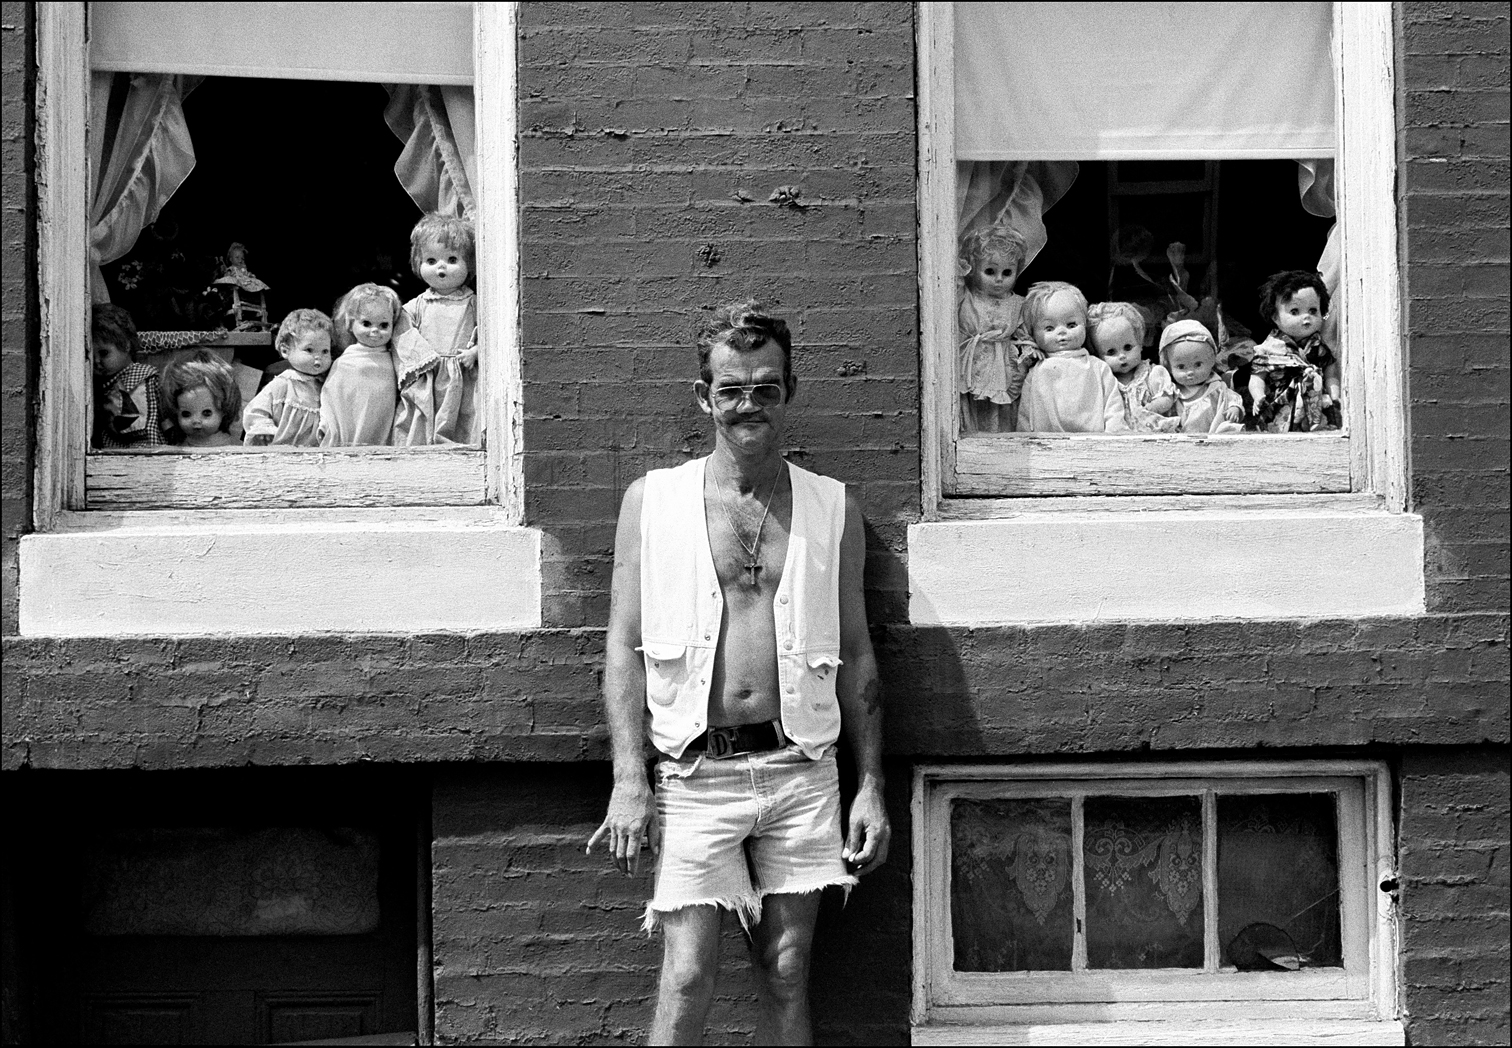 photograph of man with dolls in window